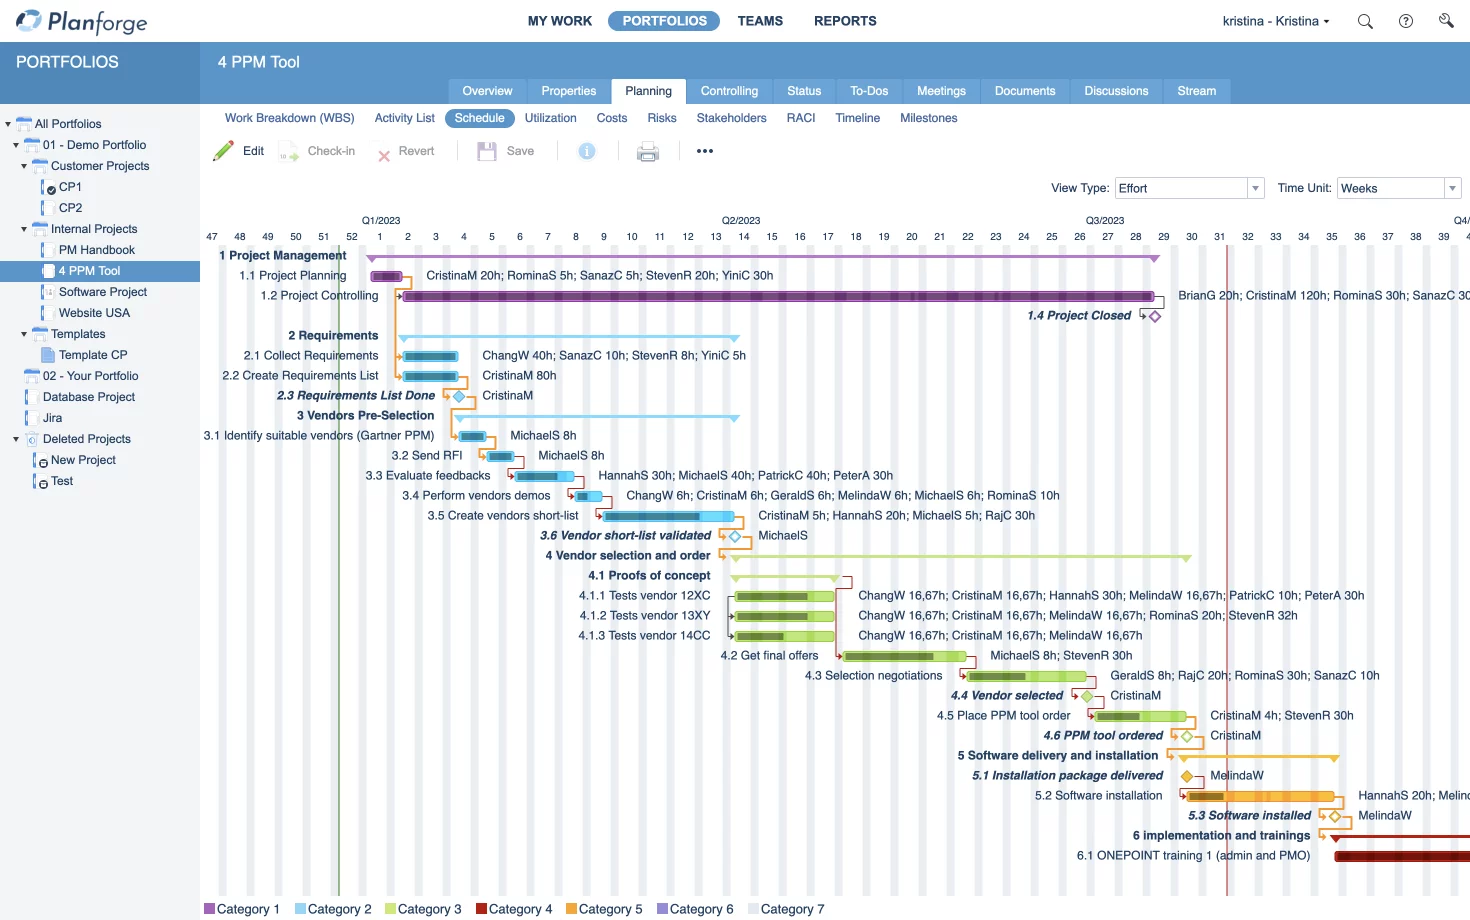 Project Management Traditional Project Planning Gantt Chart Schedule Software-by-Planforge